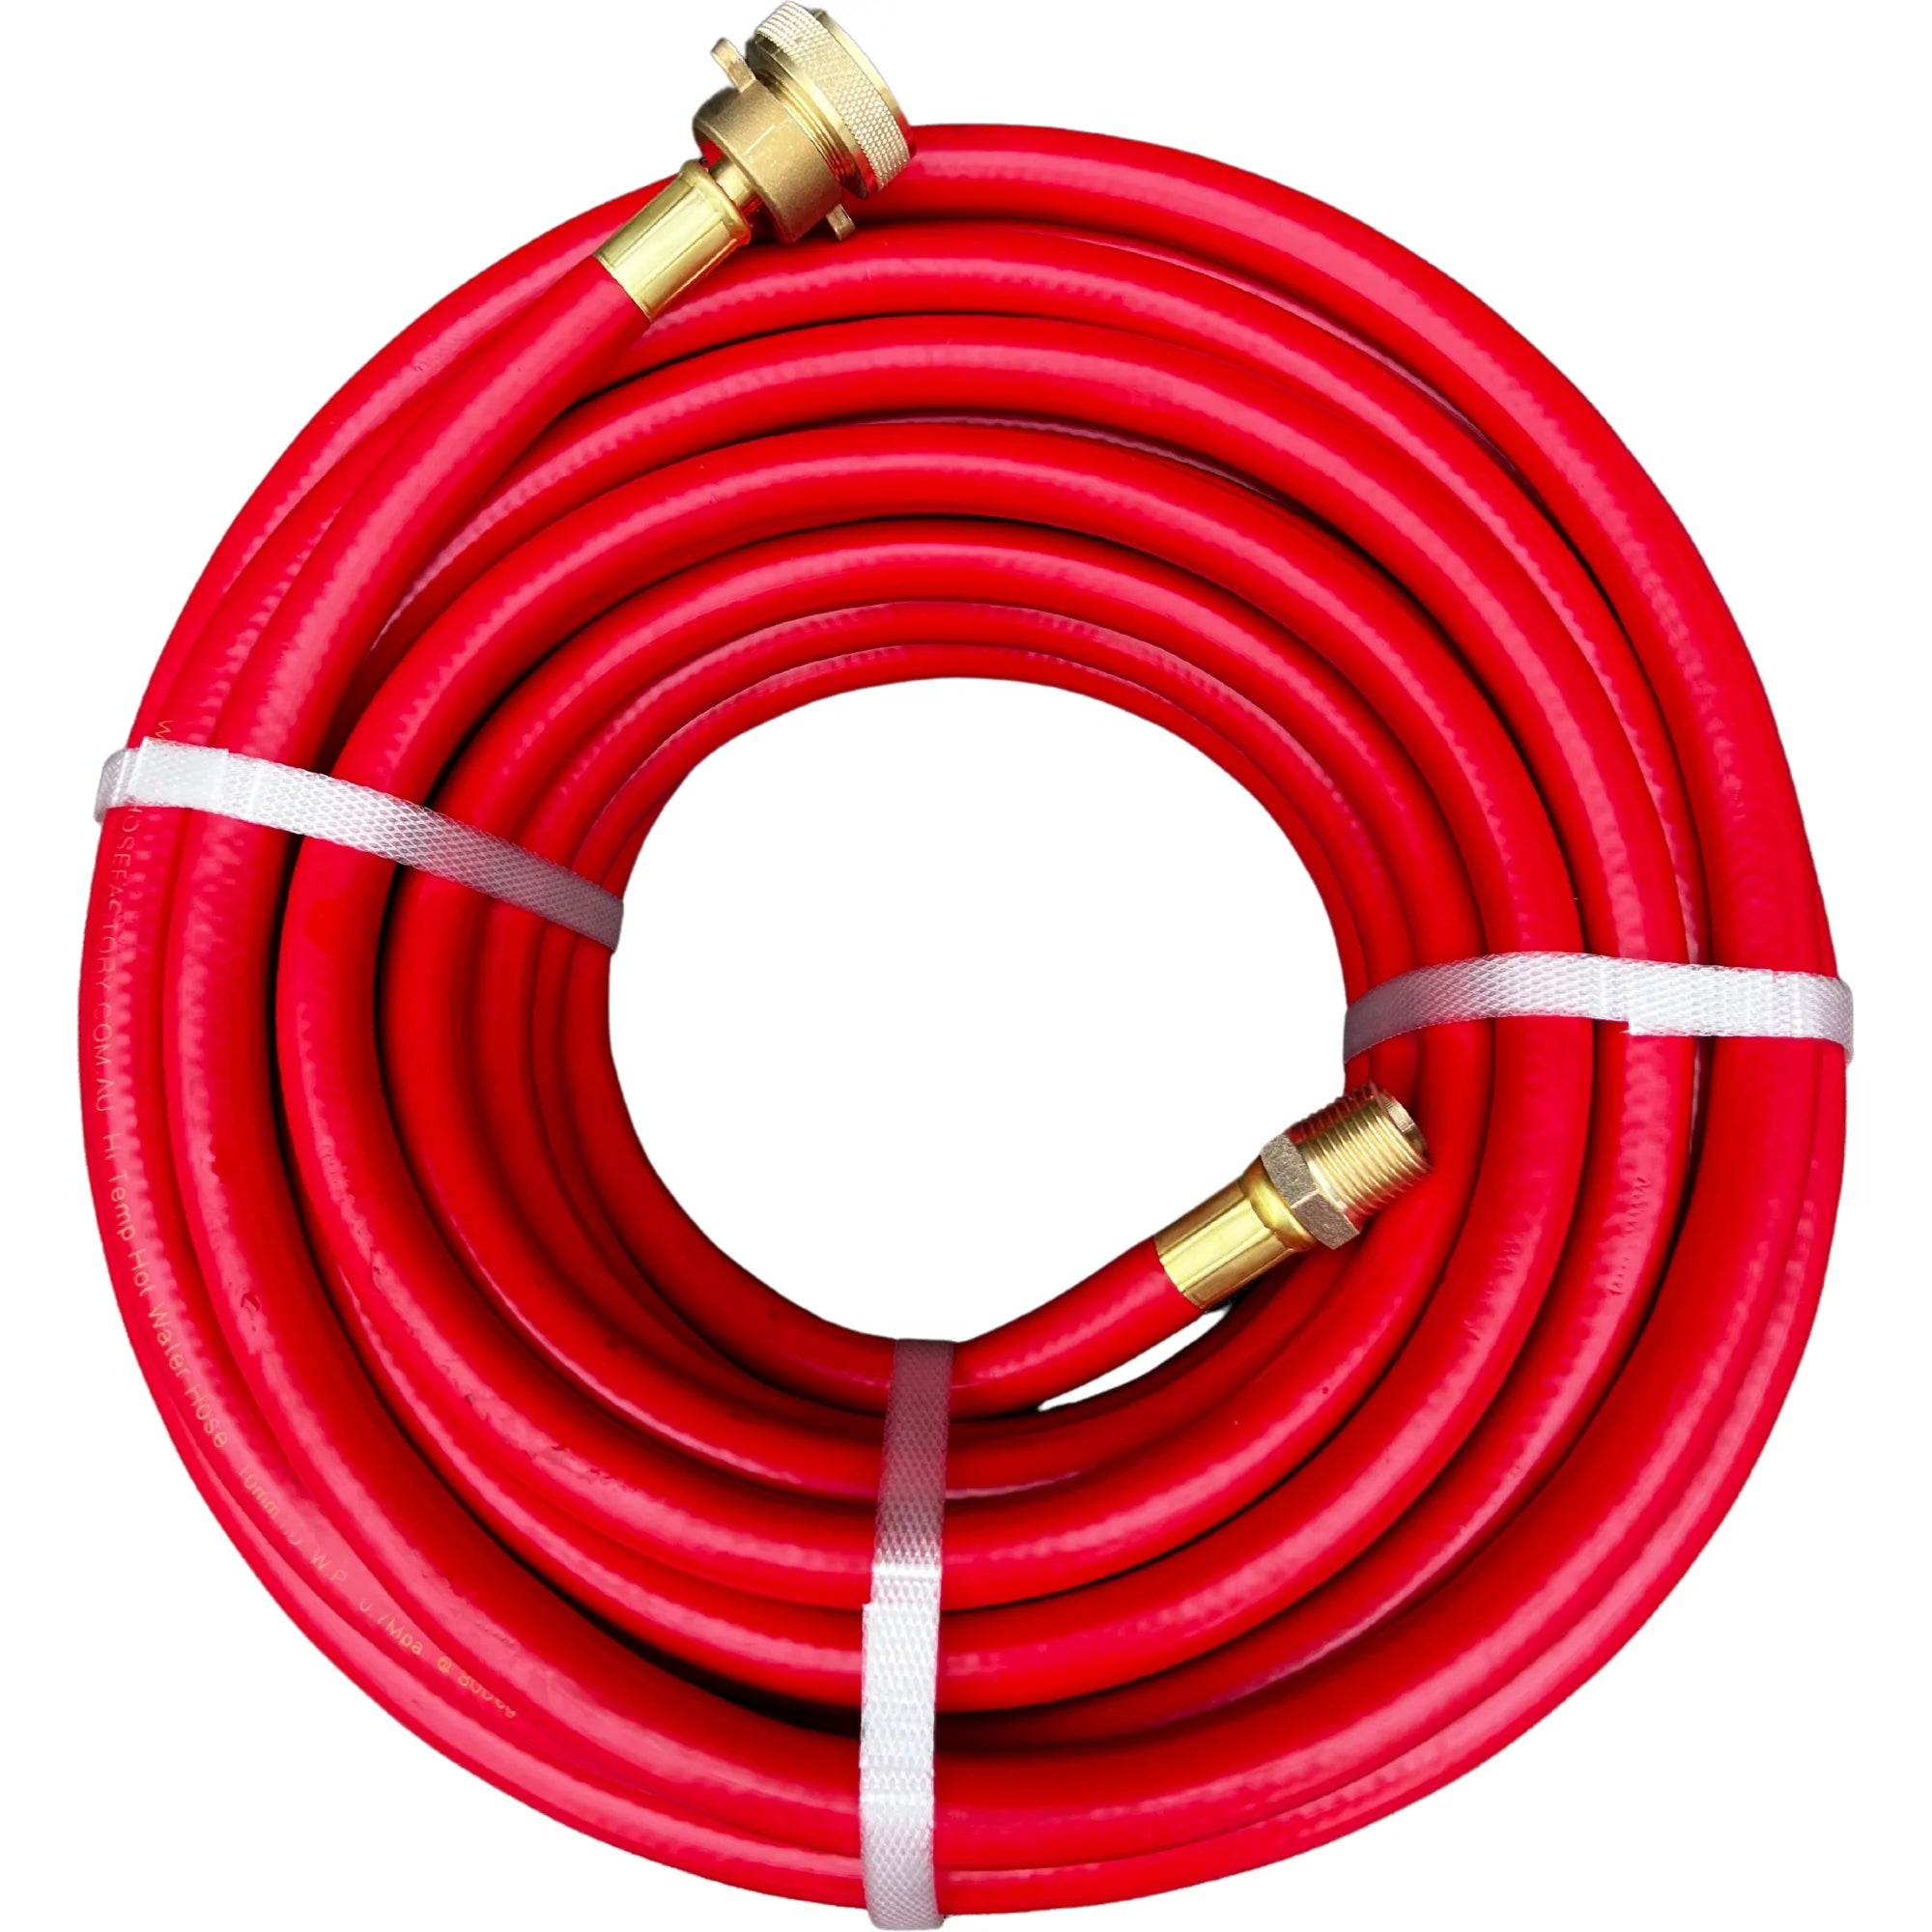 HOSE FACTORY High Temperature Hot Water Hose with crimped Brass Fittings 12mm